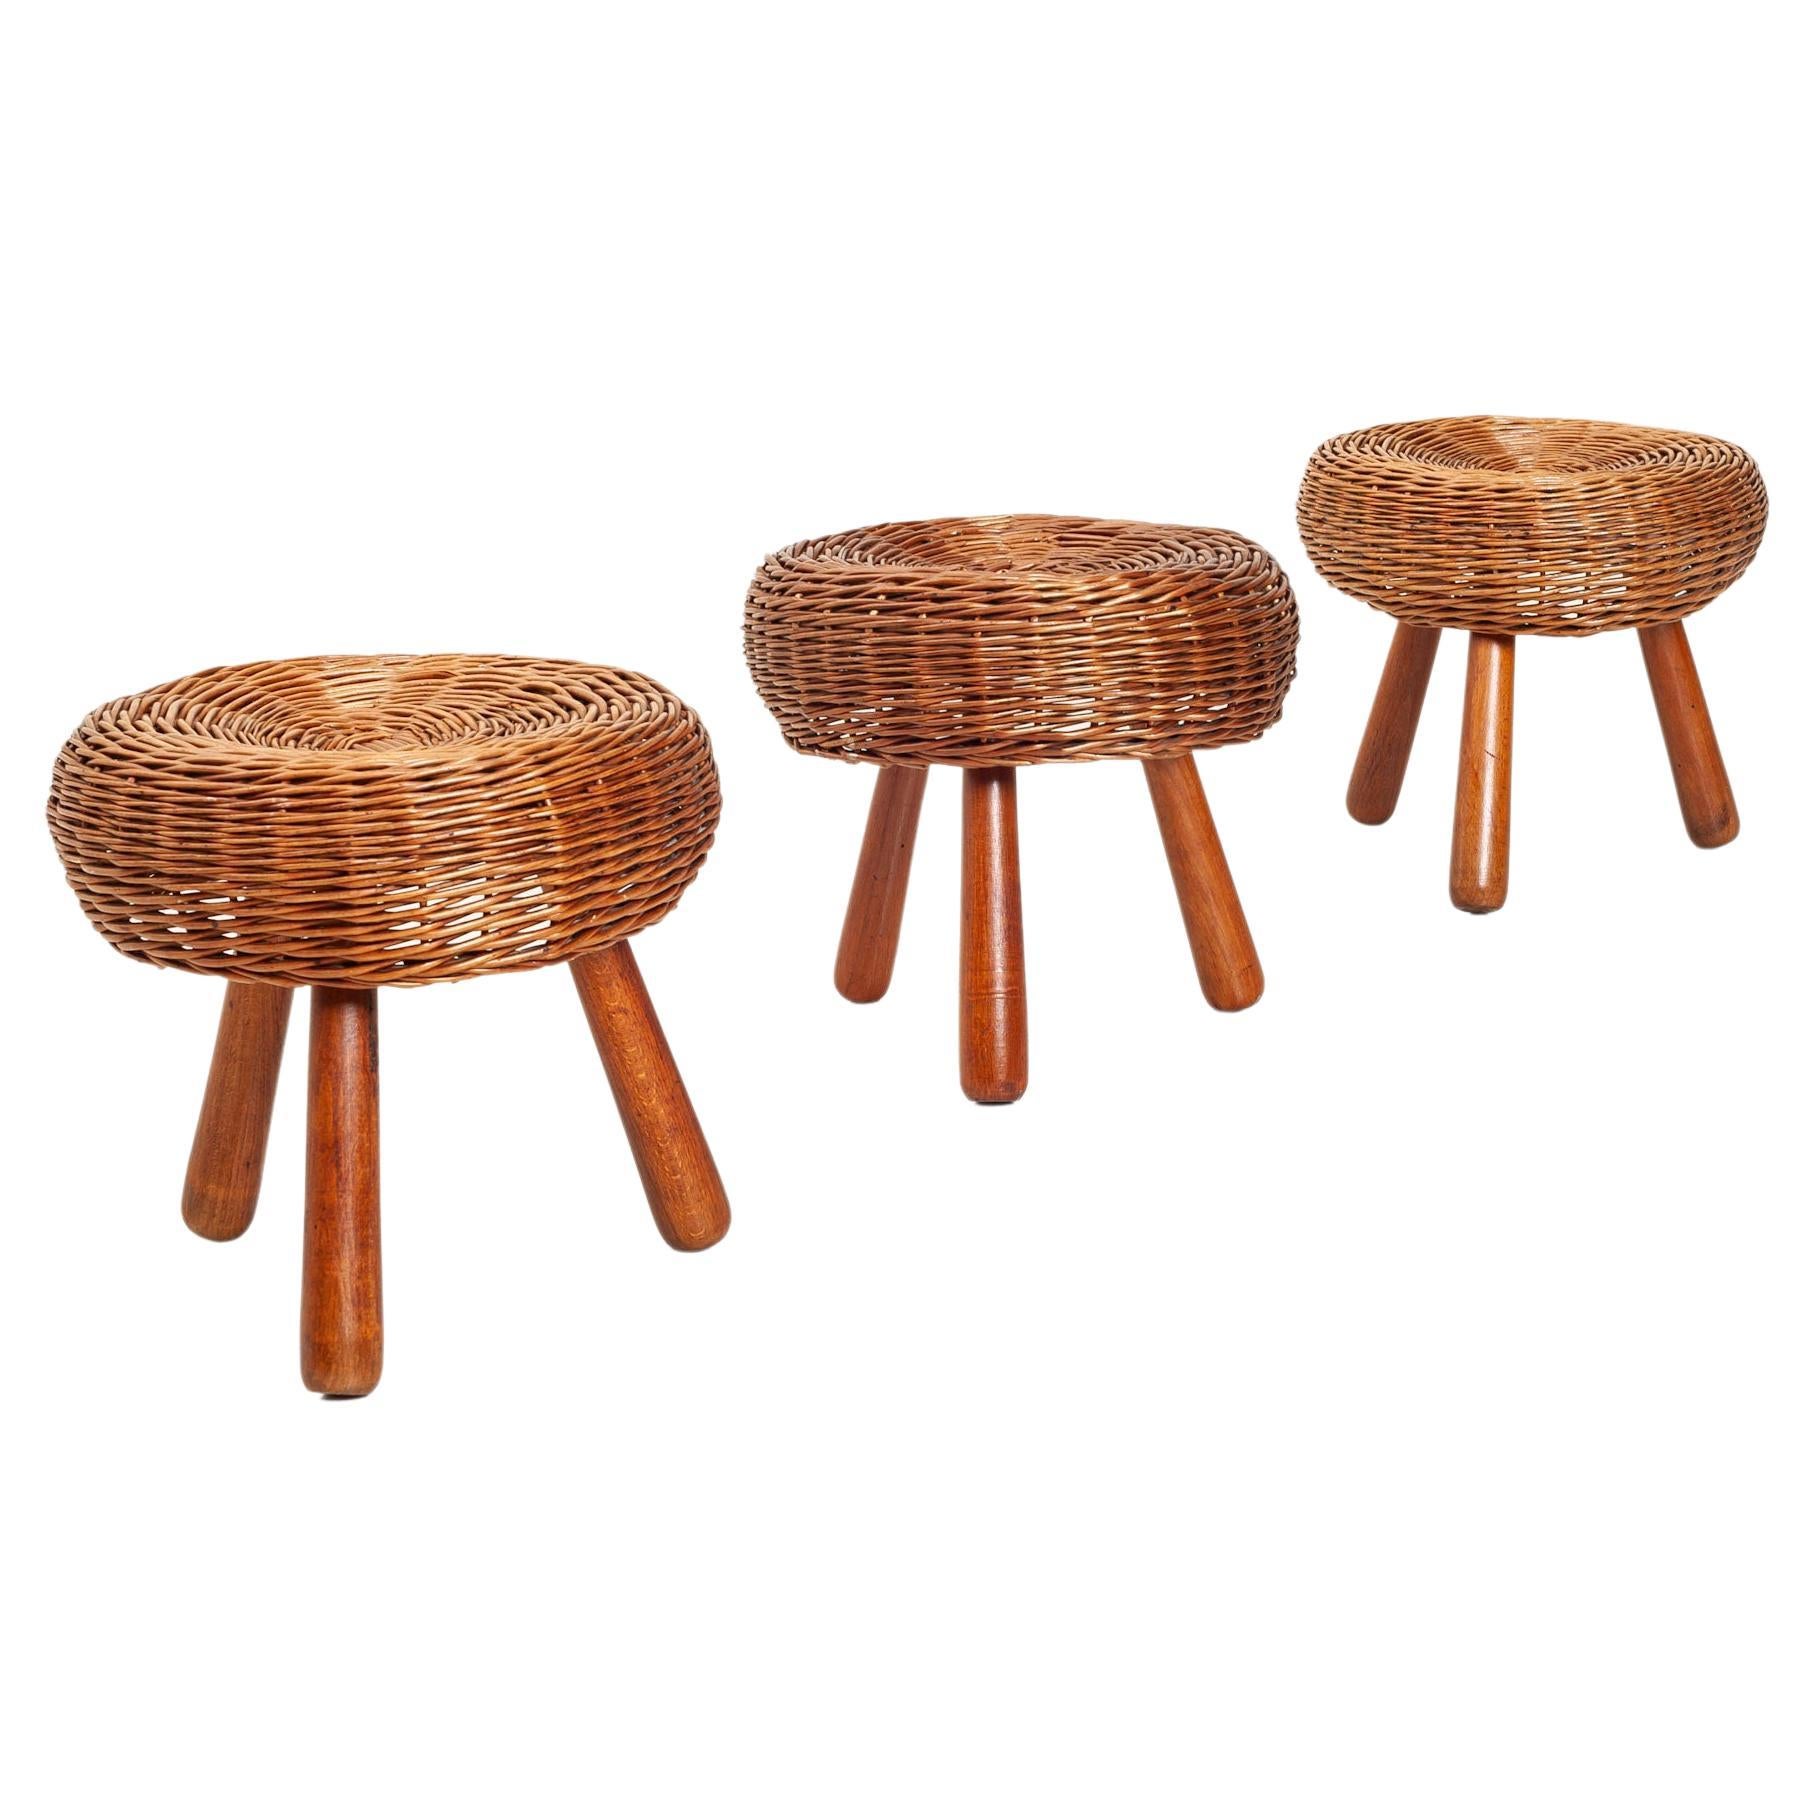 Tony Paul Attributed Low Stools, Woven Wicker, Solid Beech, United States, 1950s